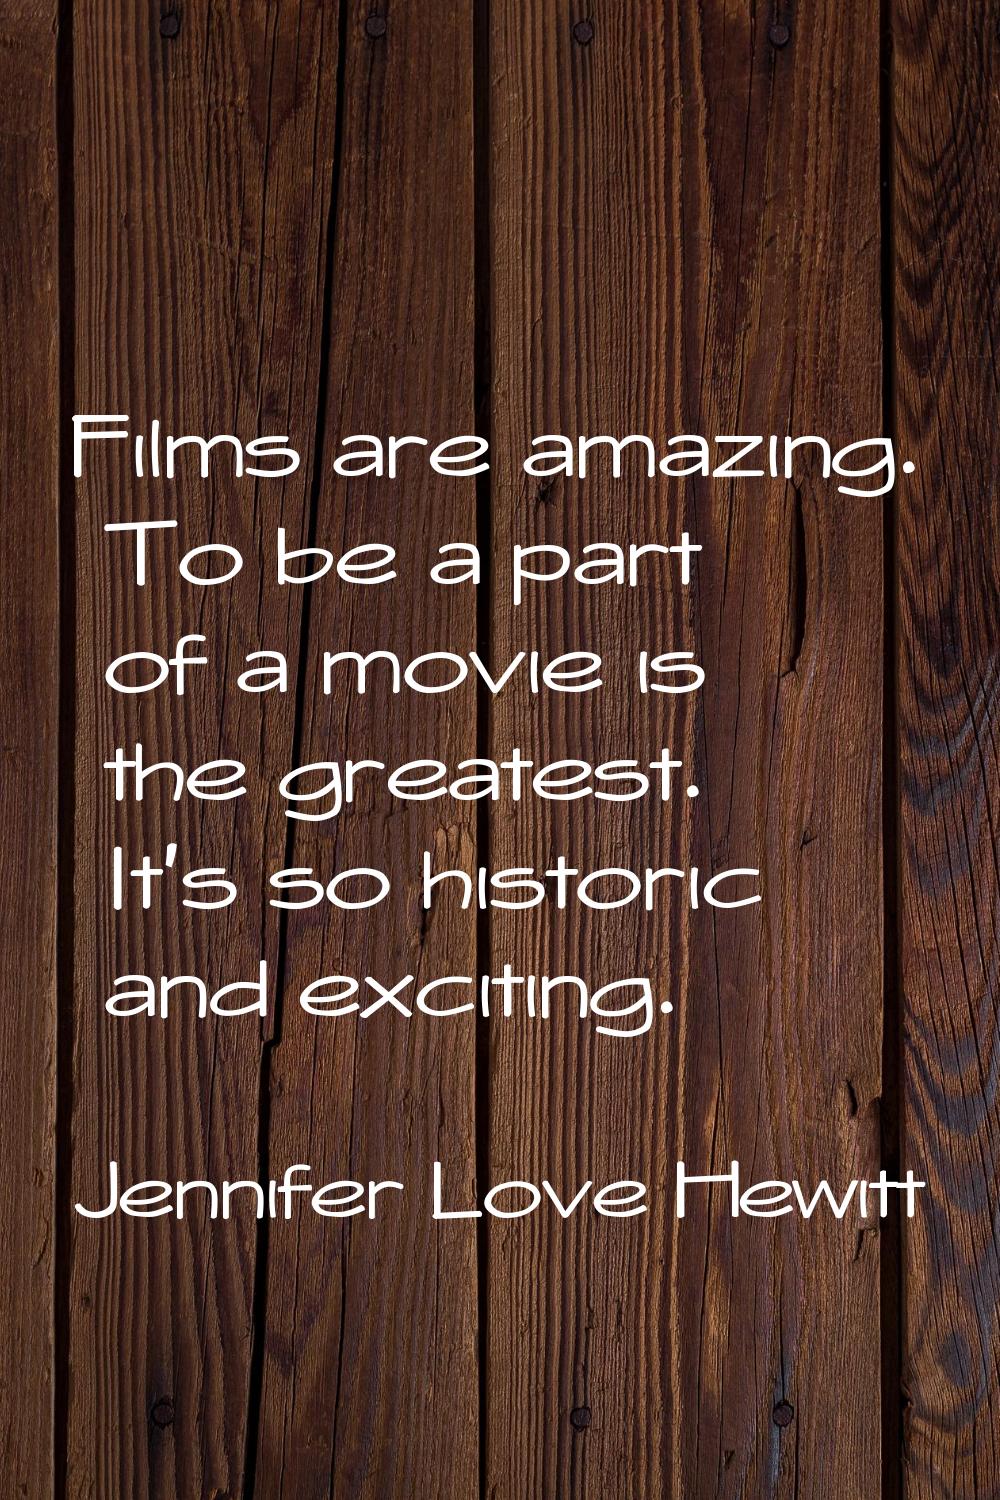 Films are amazing. To be a part of a movie is the greatest. It's so historic and exciting.